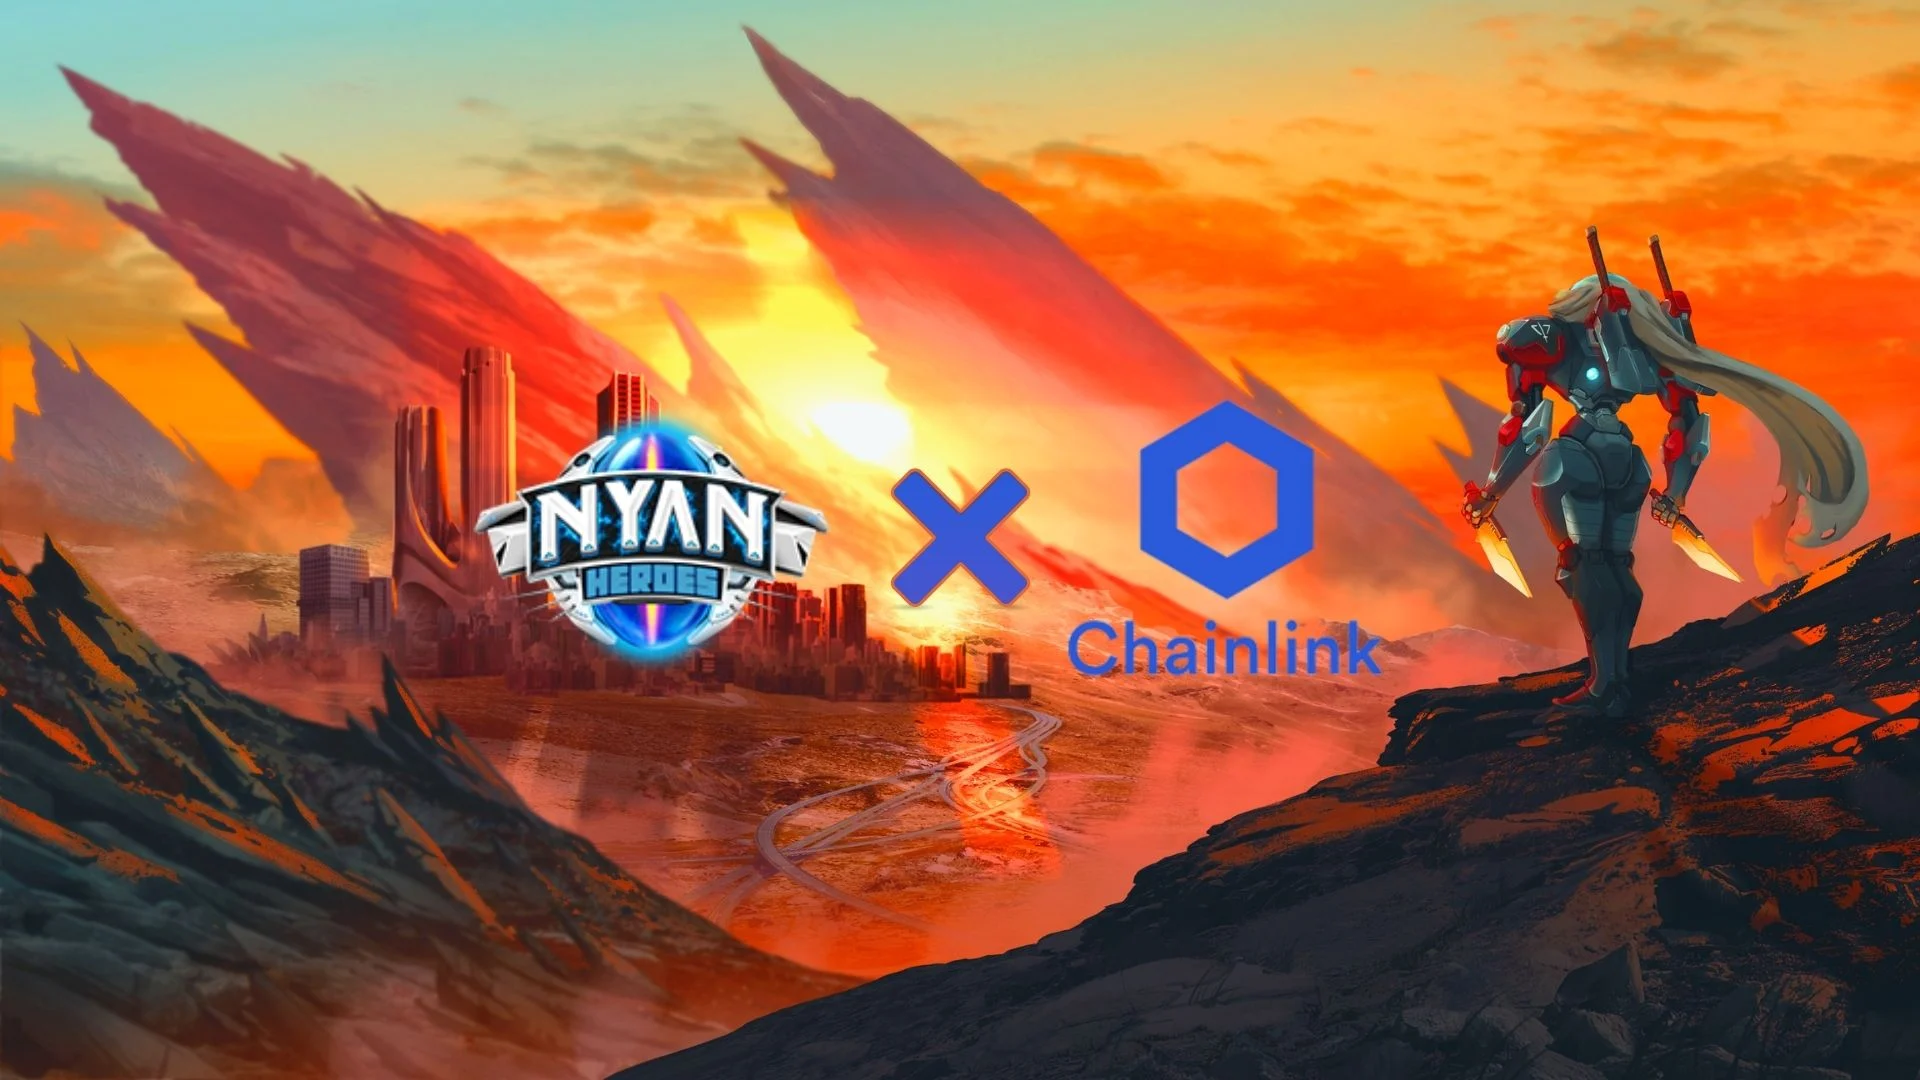 nyan heroes blockchain games chanlink Nyan Heroes, an NFT Nyan Based Metaverse, integrates Chainlink Price feeds on Solana.